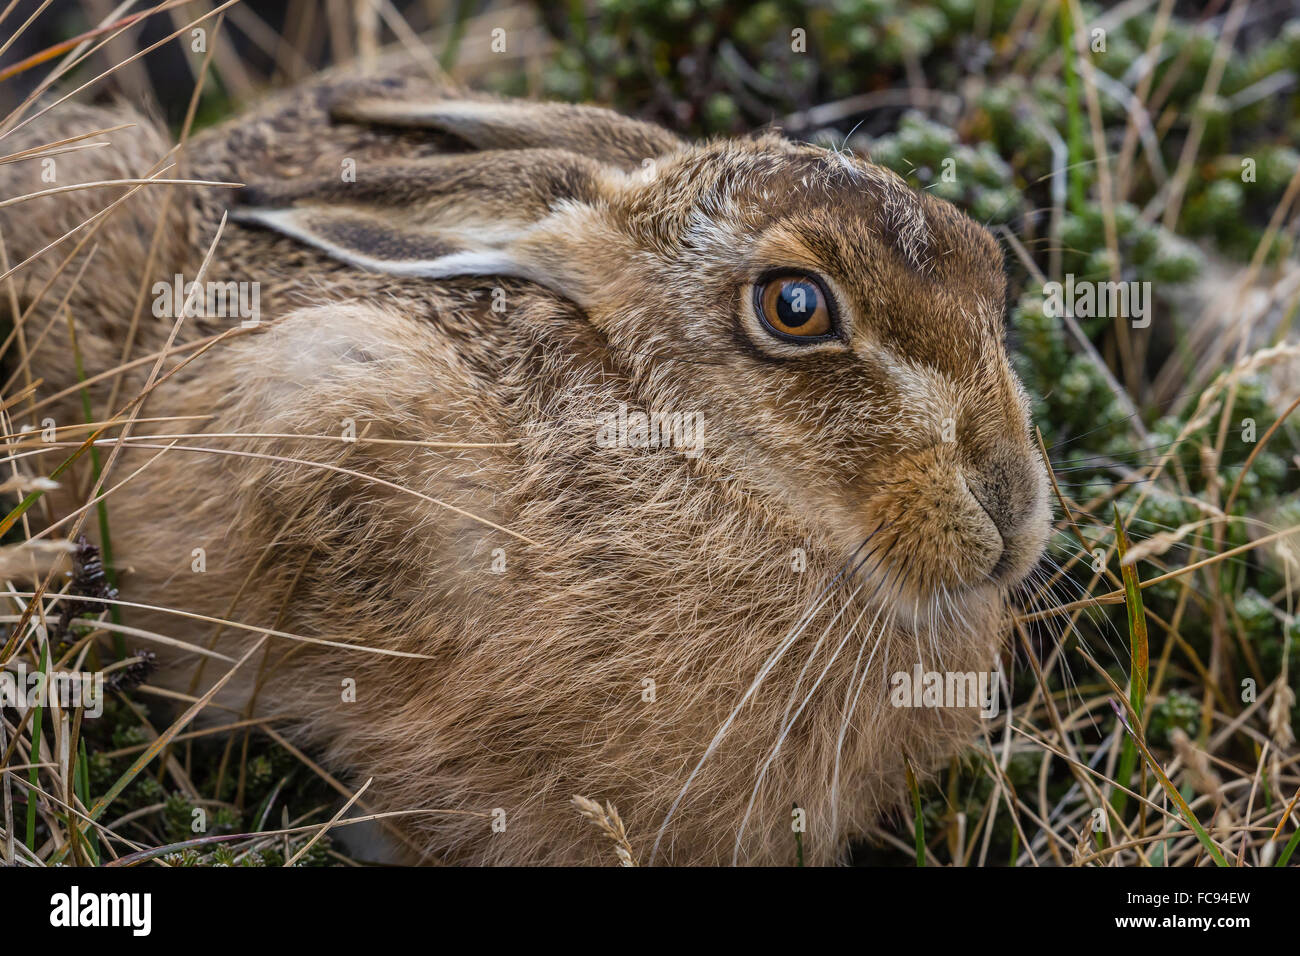 The introduced and very invasive European rabbit (Oryctolagus cuniculus), outside Stanley, Falkland Islands, South America Stock Photo